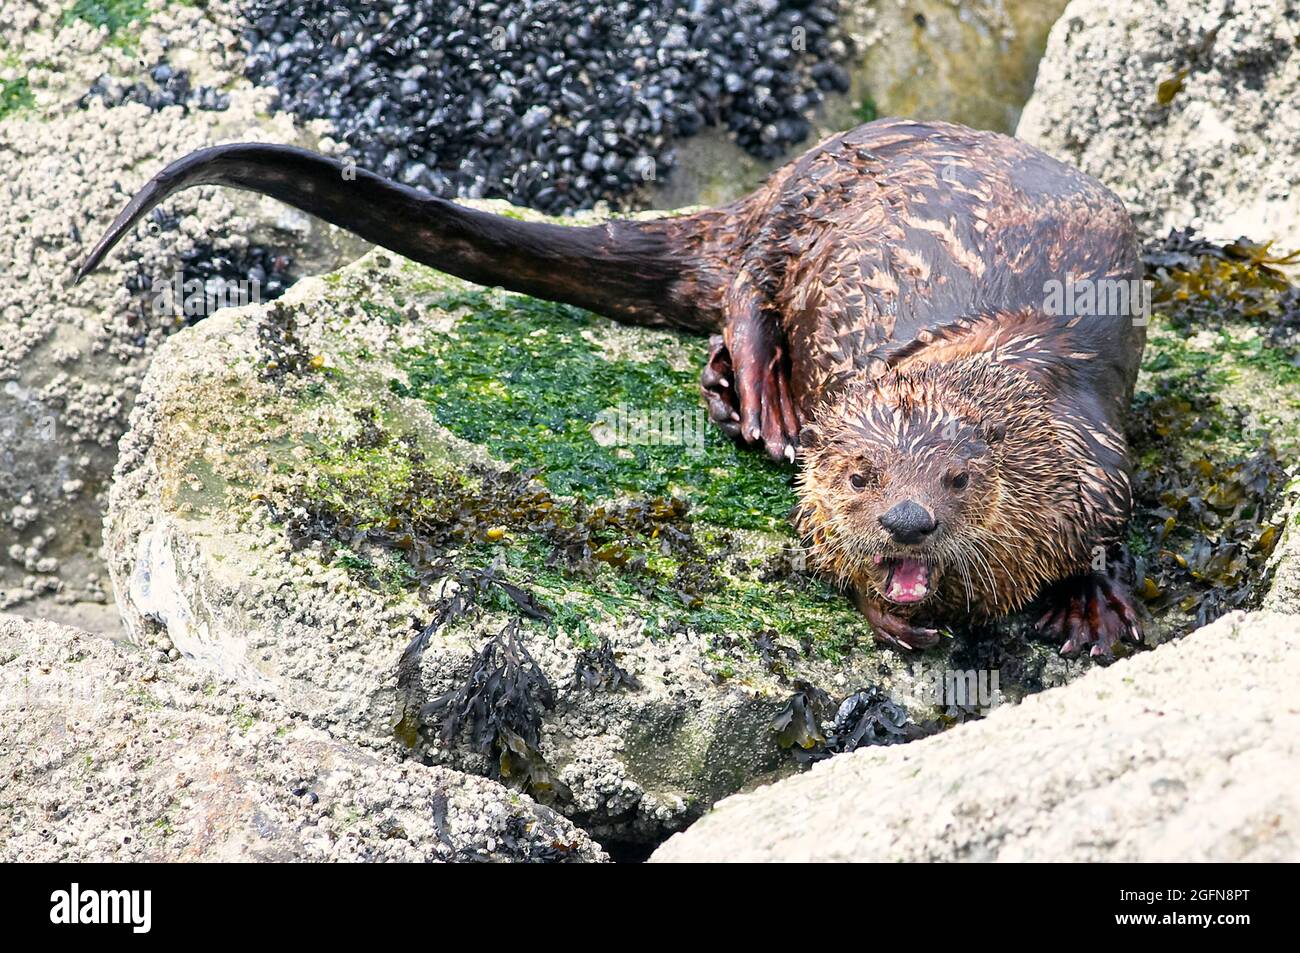 North American river otter (Lontra canadensis) on rocks with barnacles. Stock Photo